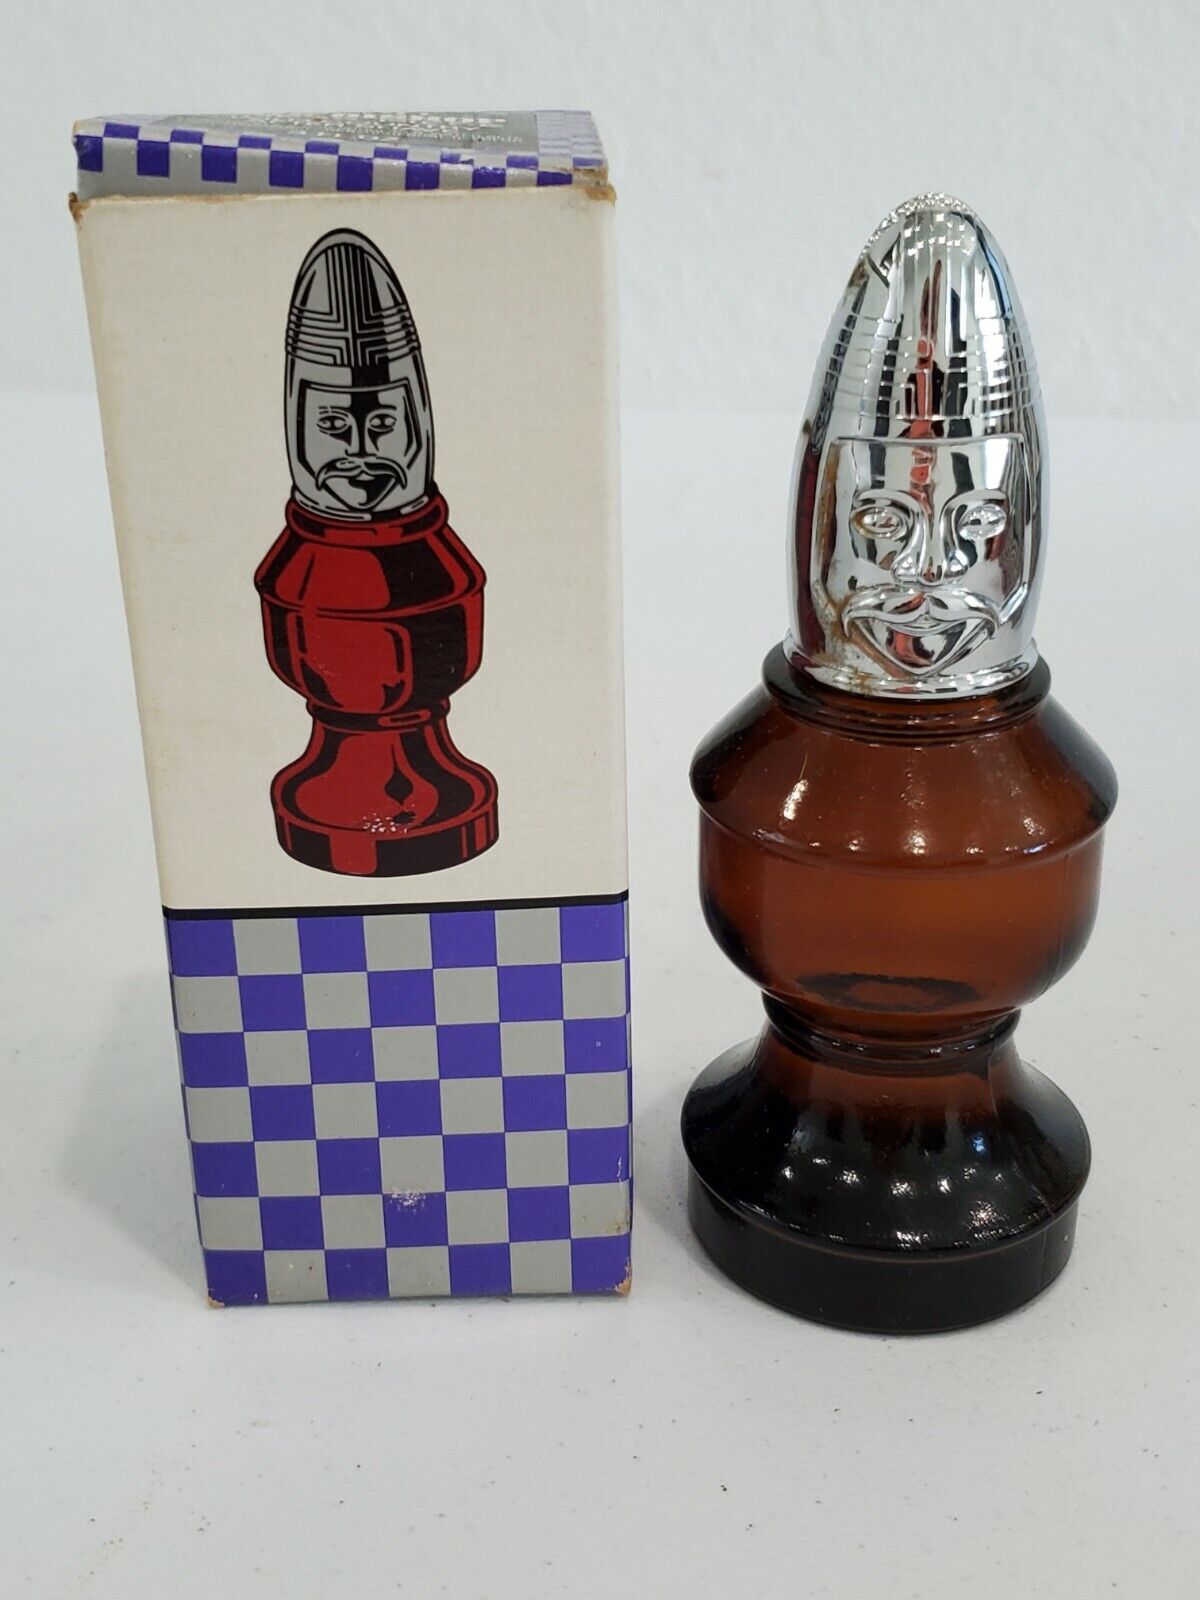 AVON THE BISHOP CHESS PIECE FULL BOTTLE WILD COUNTRY AFTER SHAVE WITH BOX Avon